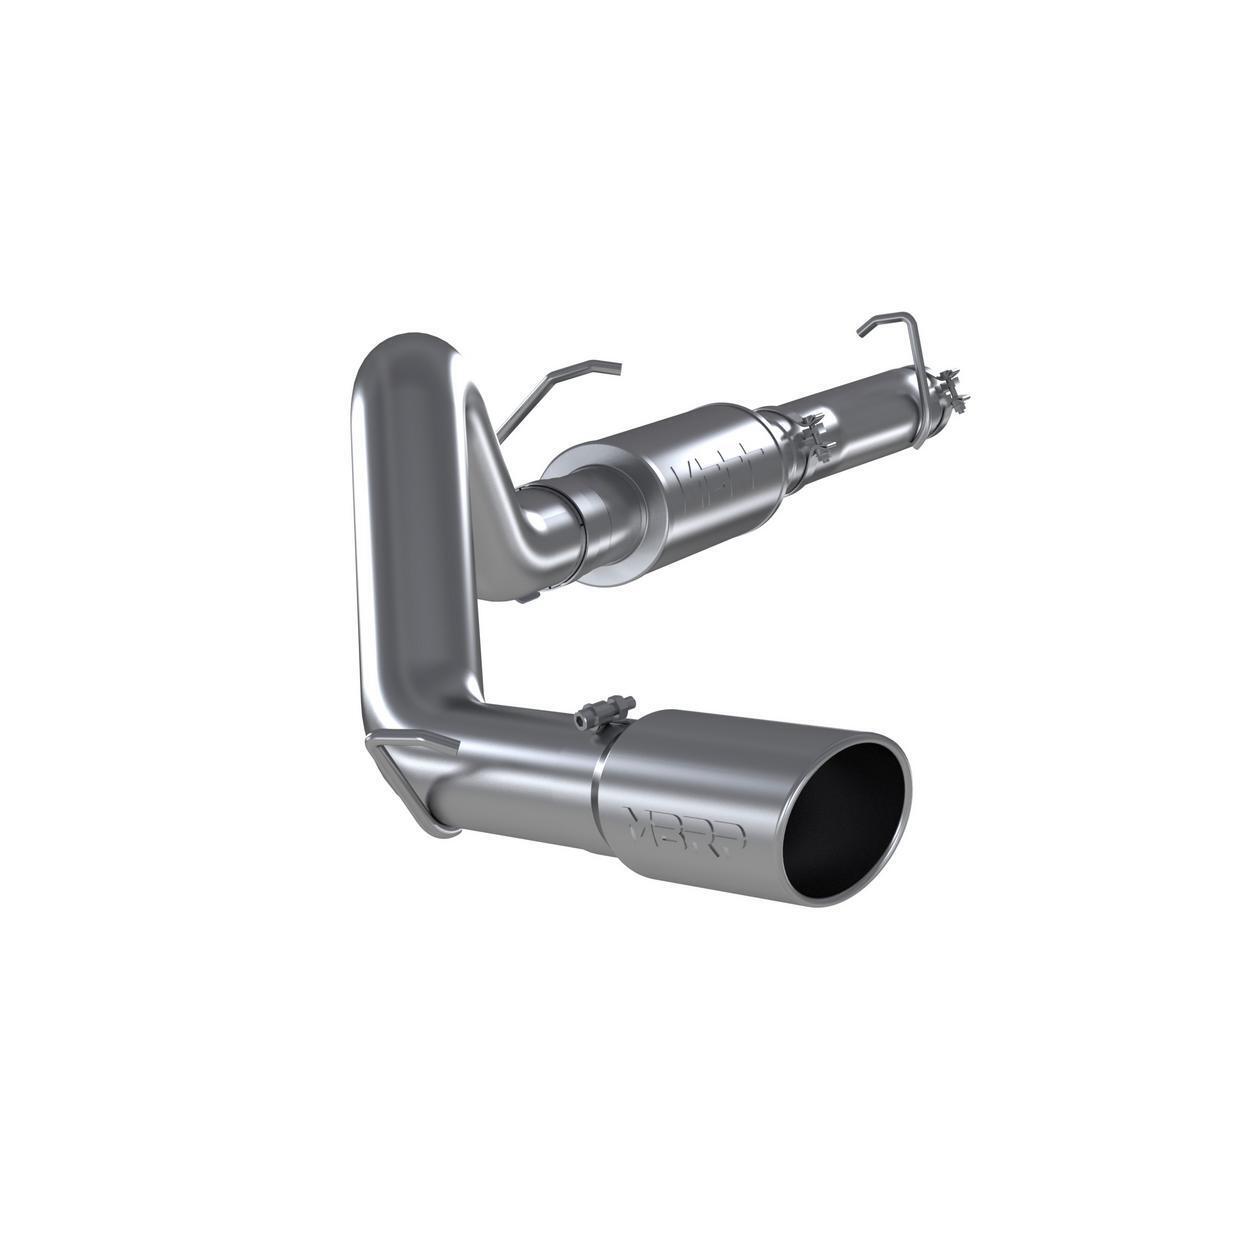 MBRP Exhaust System Kit for 2004-2005 Ford E-350 Club Wagon